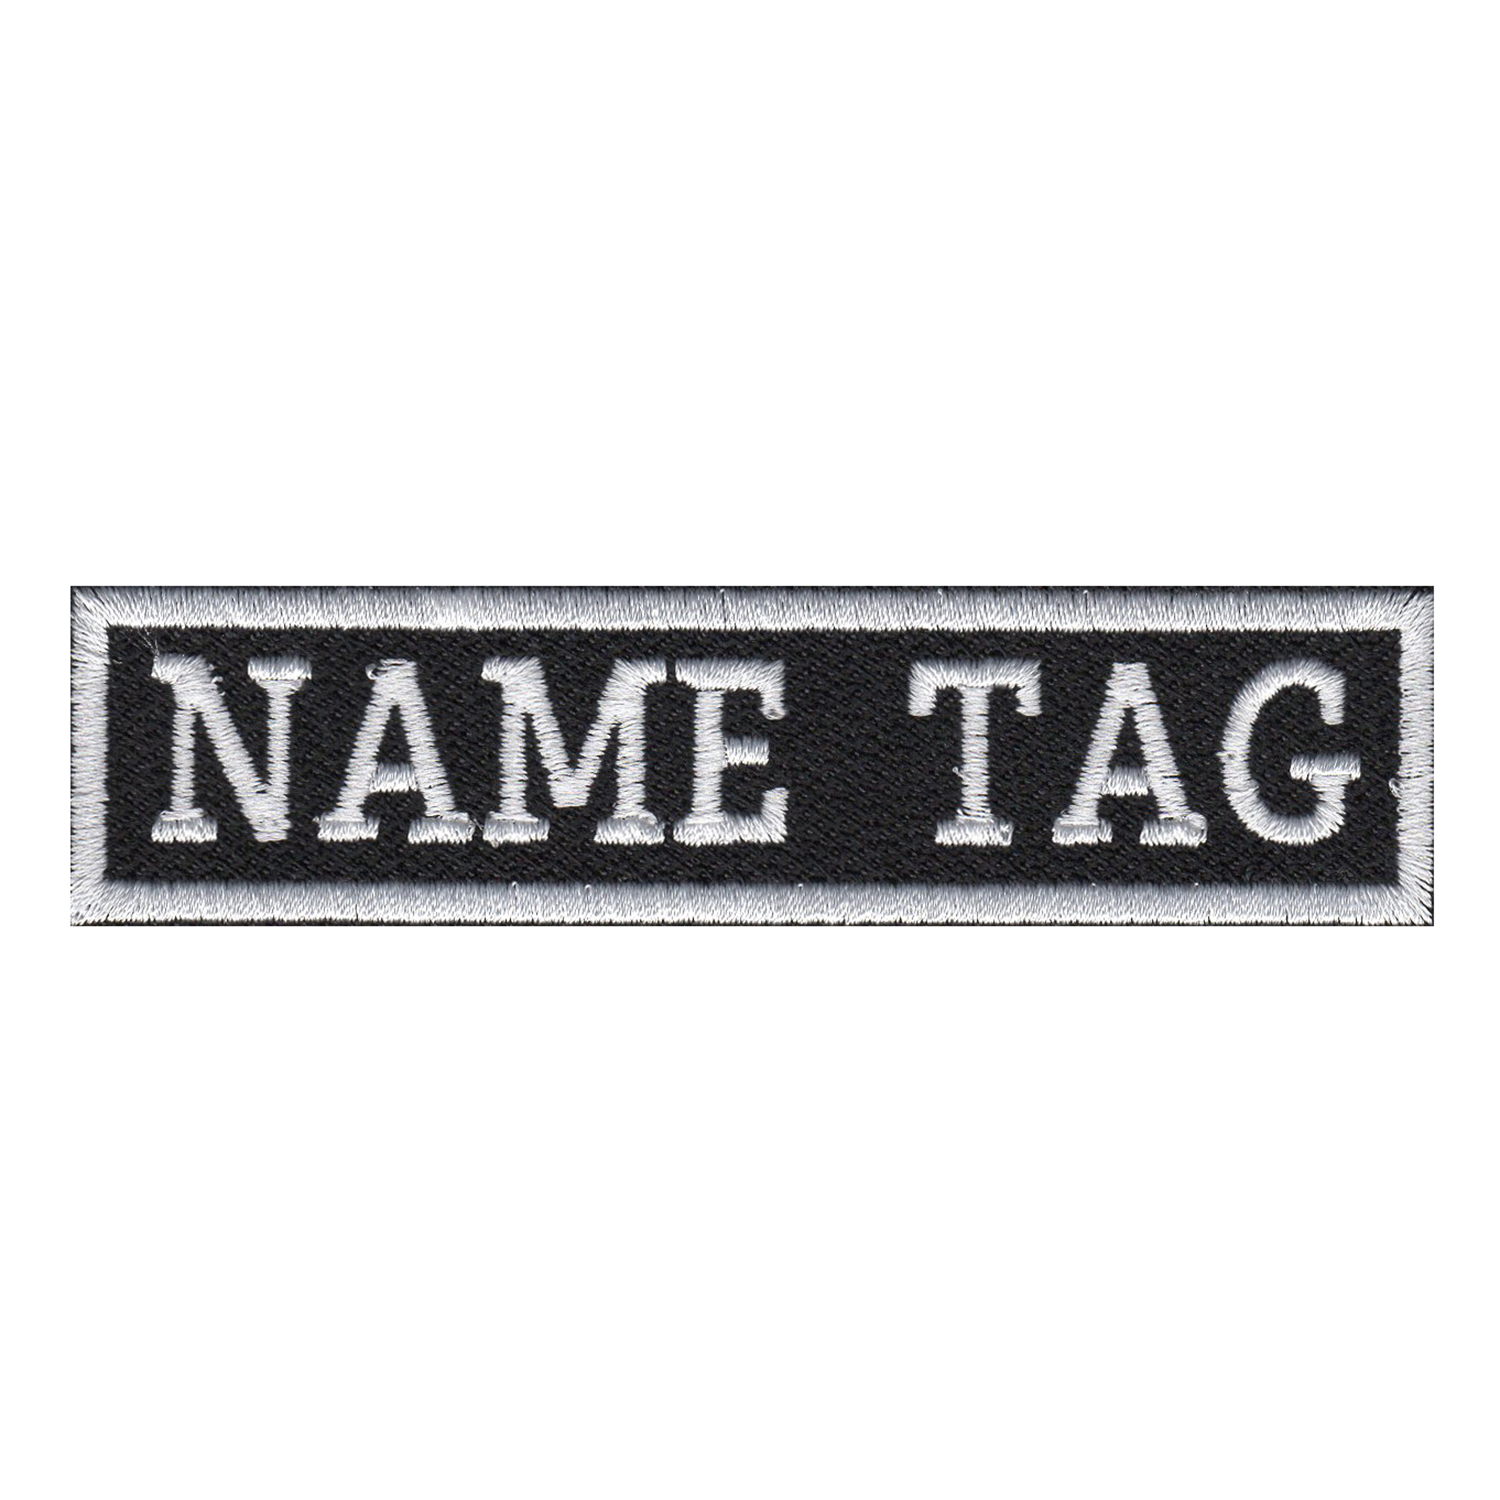 Biker Patch badge 4"x1" Rectangle Custom Embroidered Name Tag 